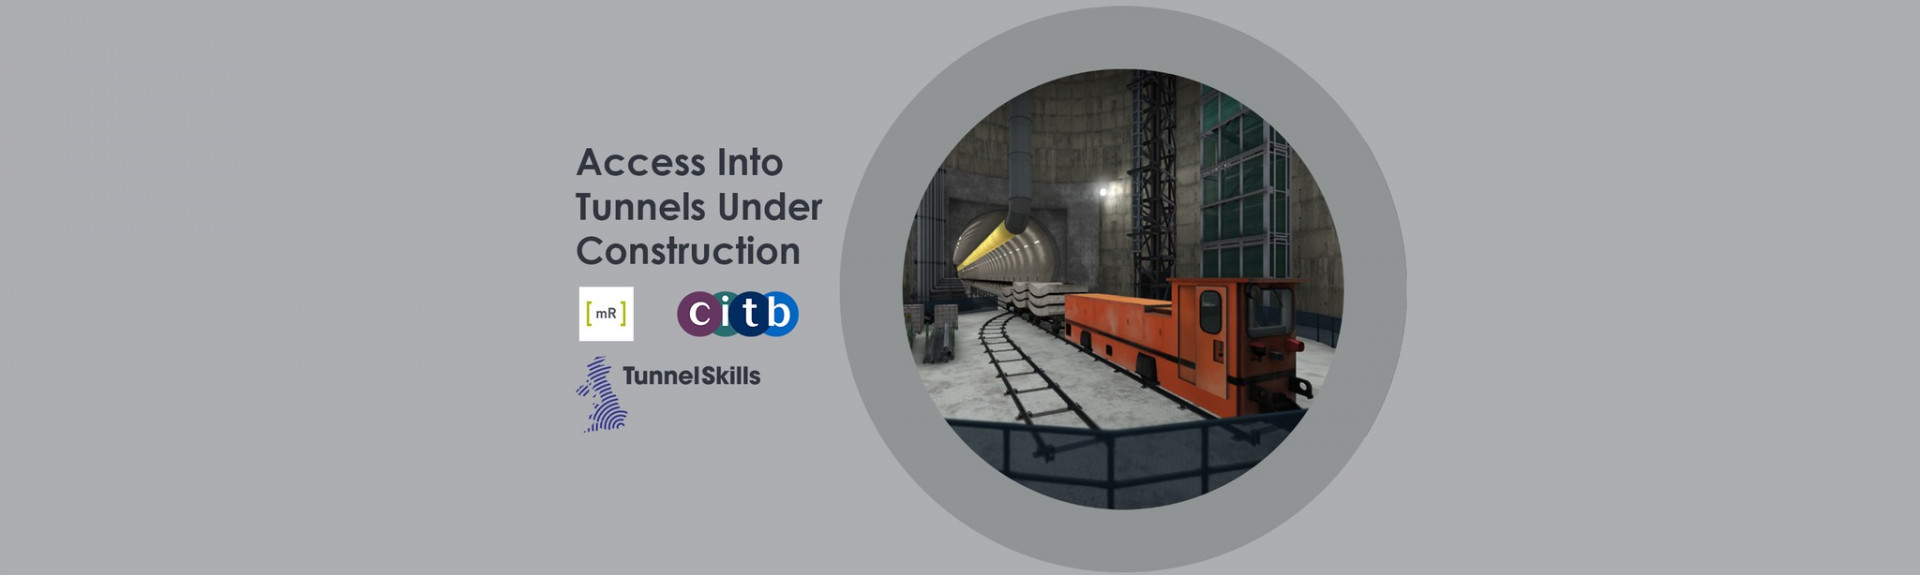 TunnelSkills - Access into Tunnels Under Construction